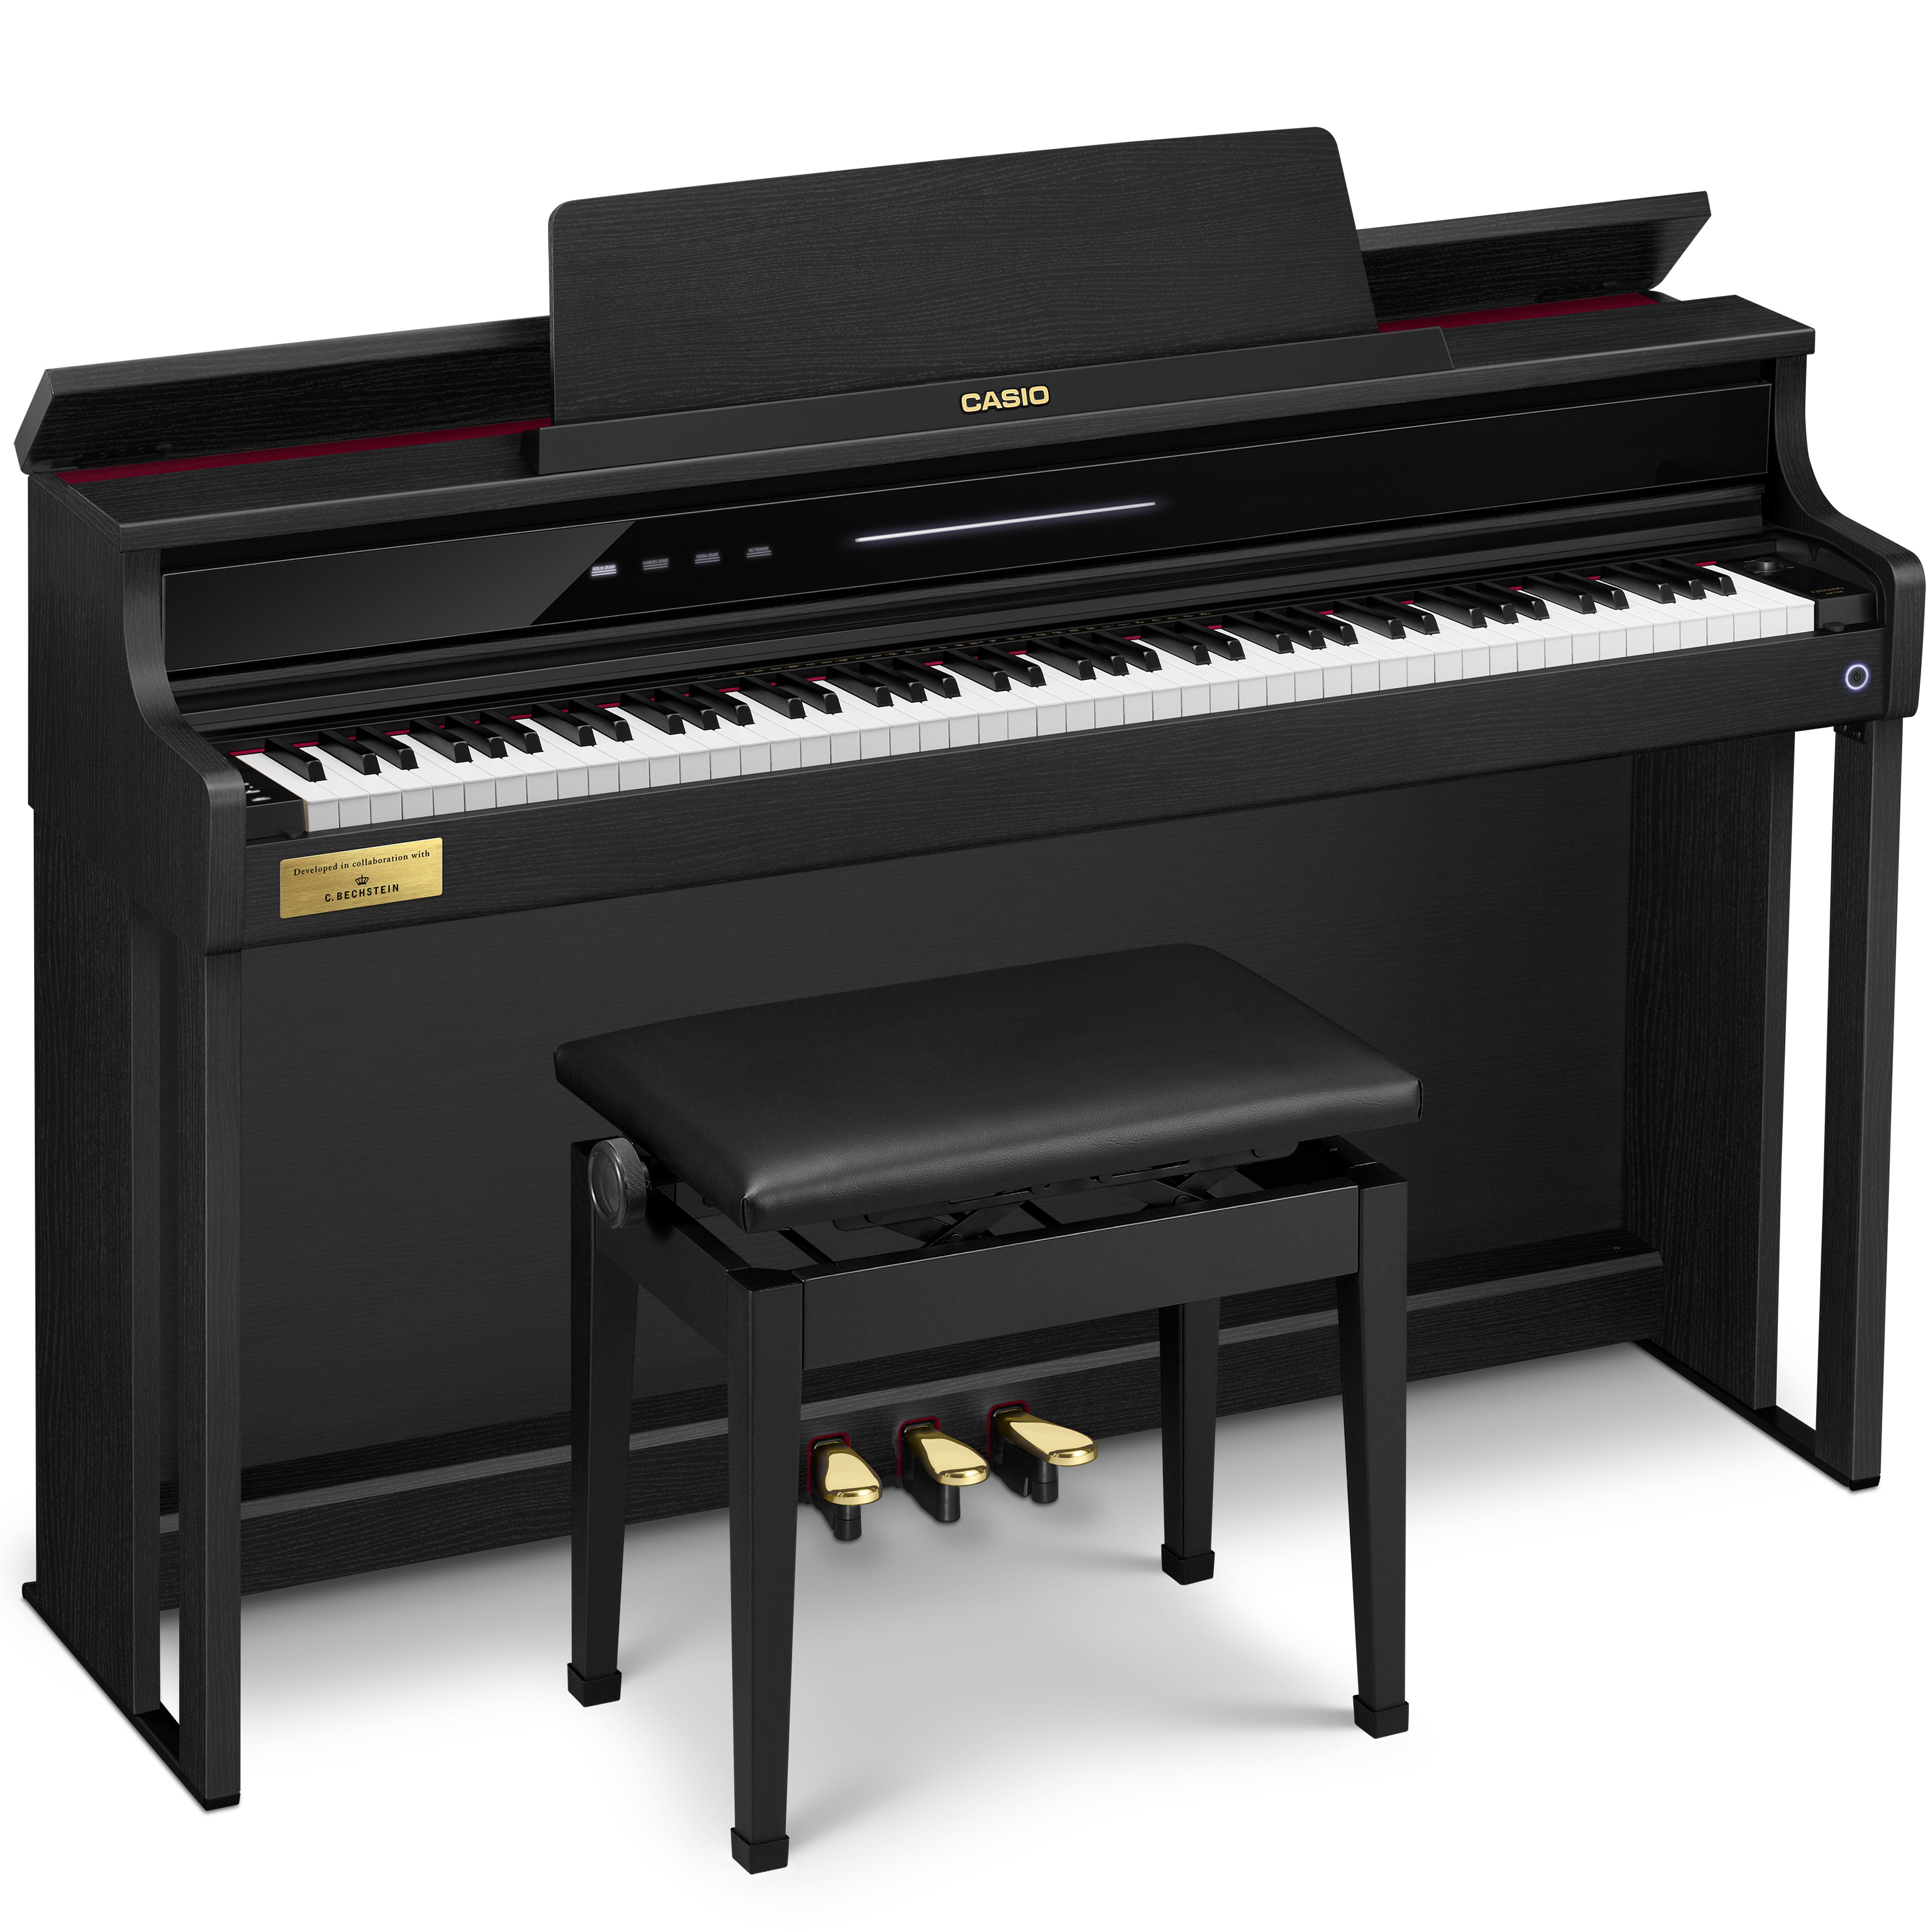 Casio Celviano AP-750 Digital Piano - Black - with lid open and bench